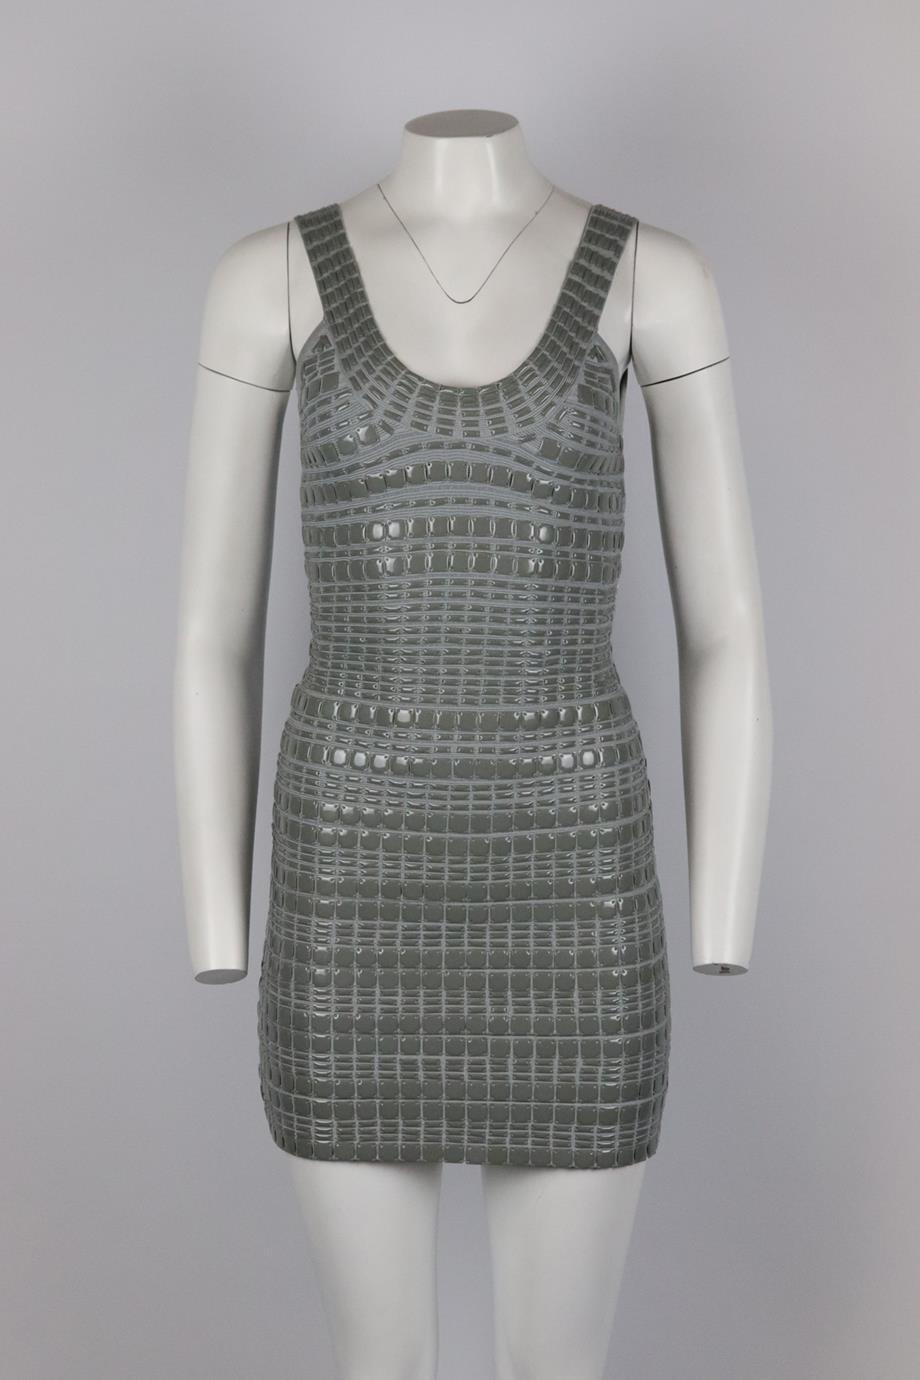 Herve Leger embellished bandage mini dress. Grey. Sleeveless, scoop neck. Zip fastening at back. Size: XSmall (UK 6, US 2, FR 34, IT 38). Bust: 30 in. Waist: 26 in. Hips: 36 in. Length: 33 in. Very good condition - Hem taken up. Composition label